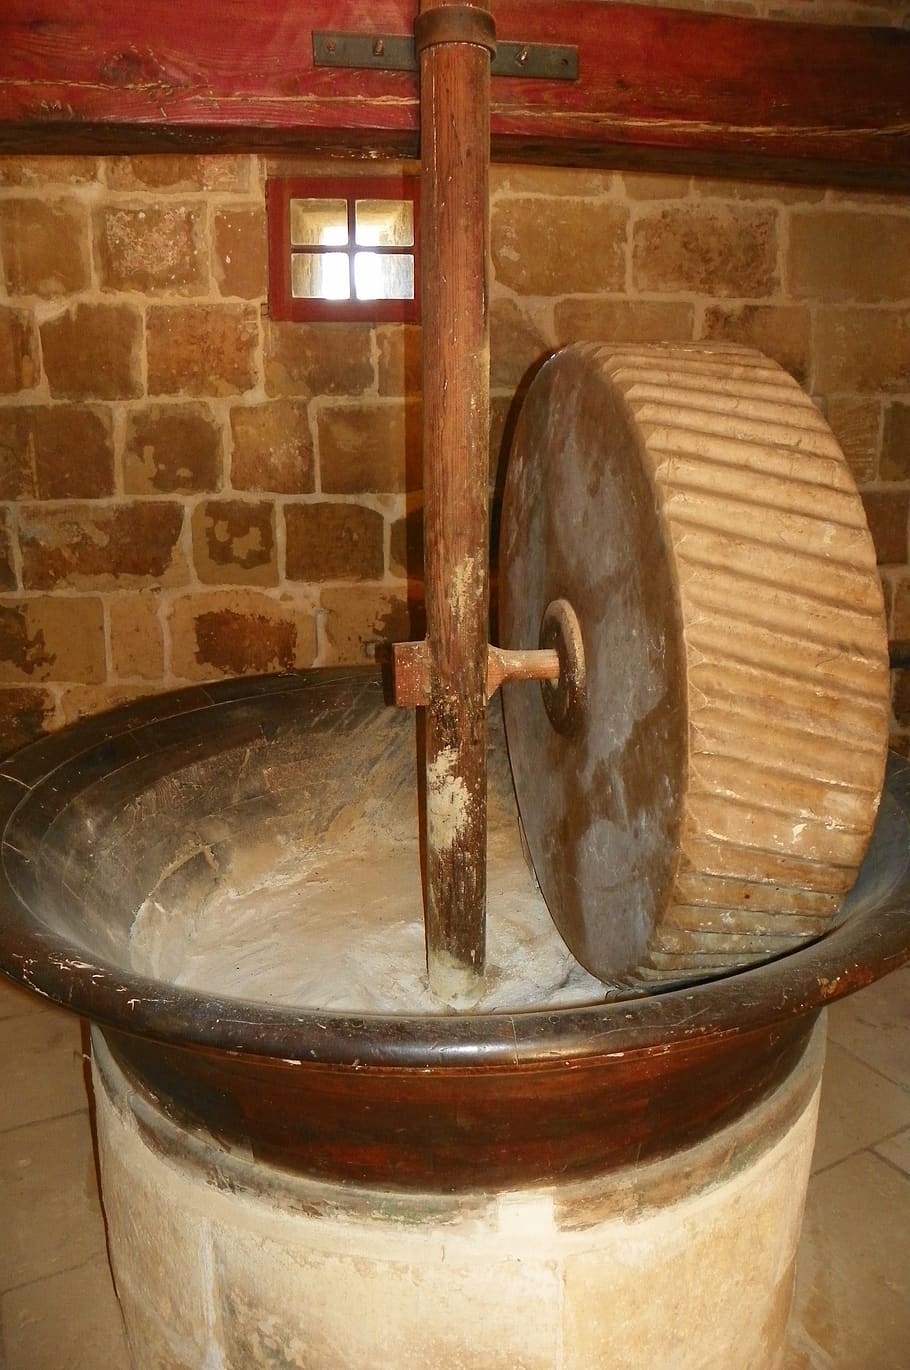 flour, mill, millstone, stone, grinding, milling, old, grain, ancient, indoors